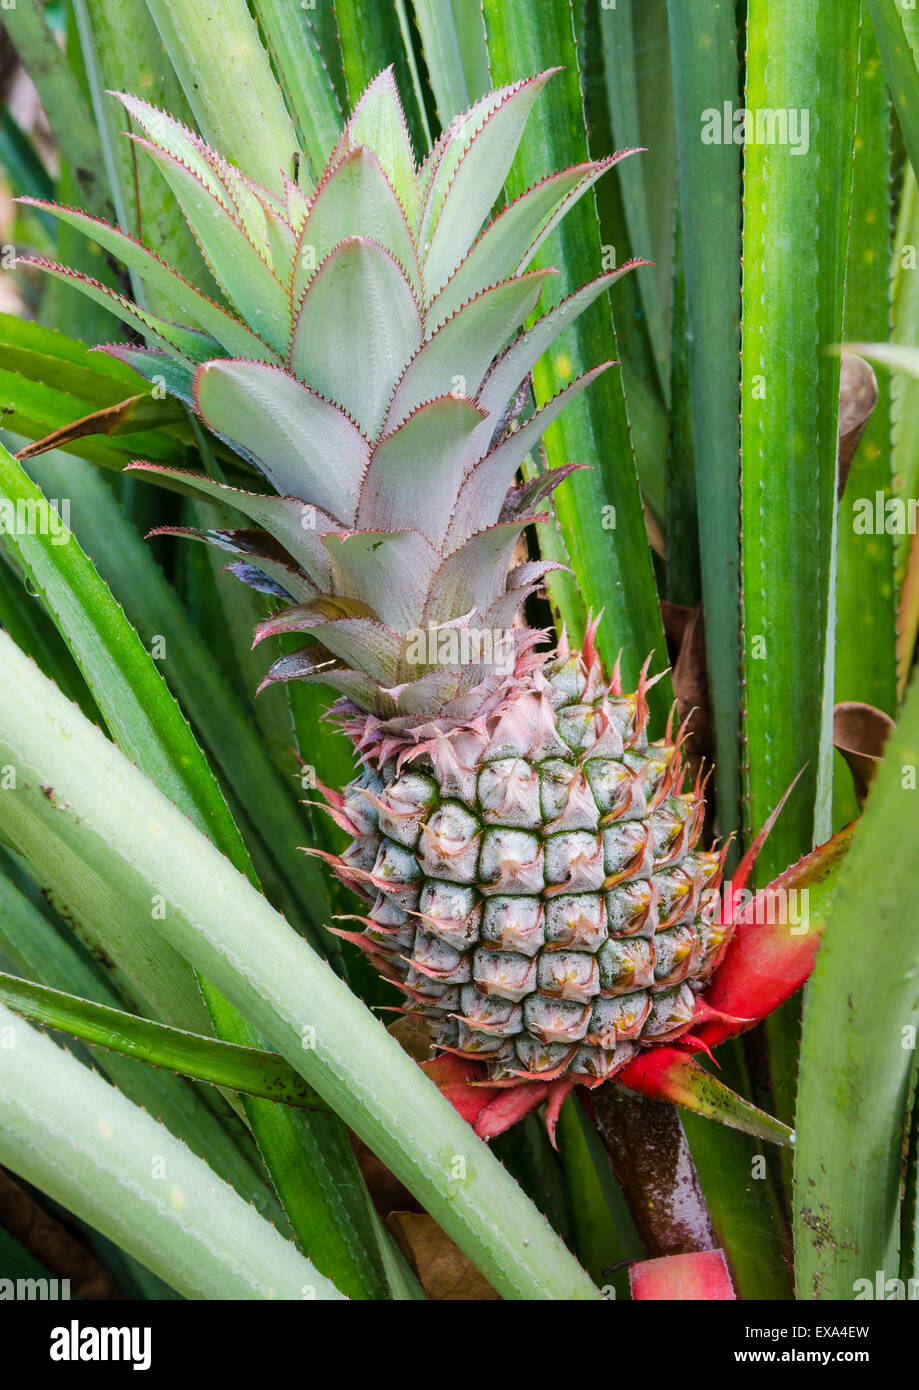 Tropical fruit of pineapple field Stock Photo